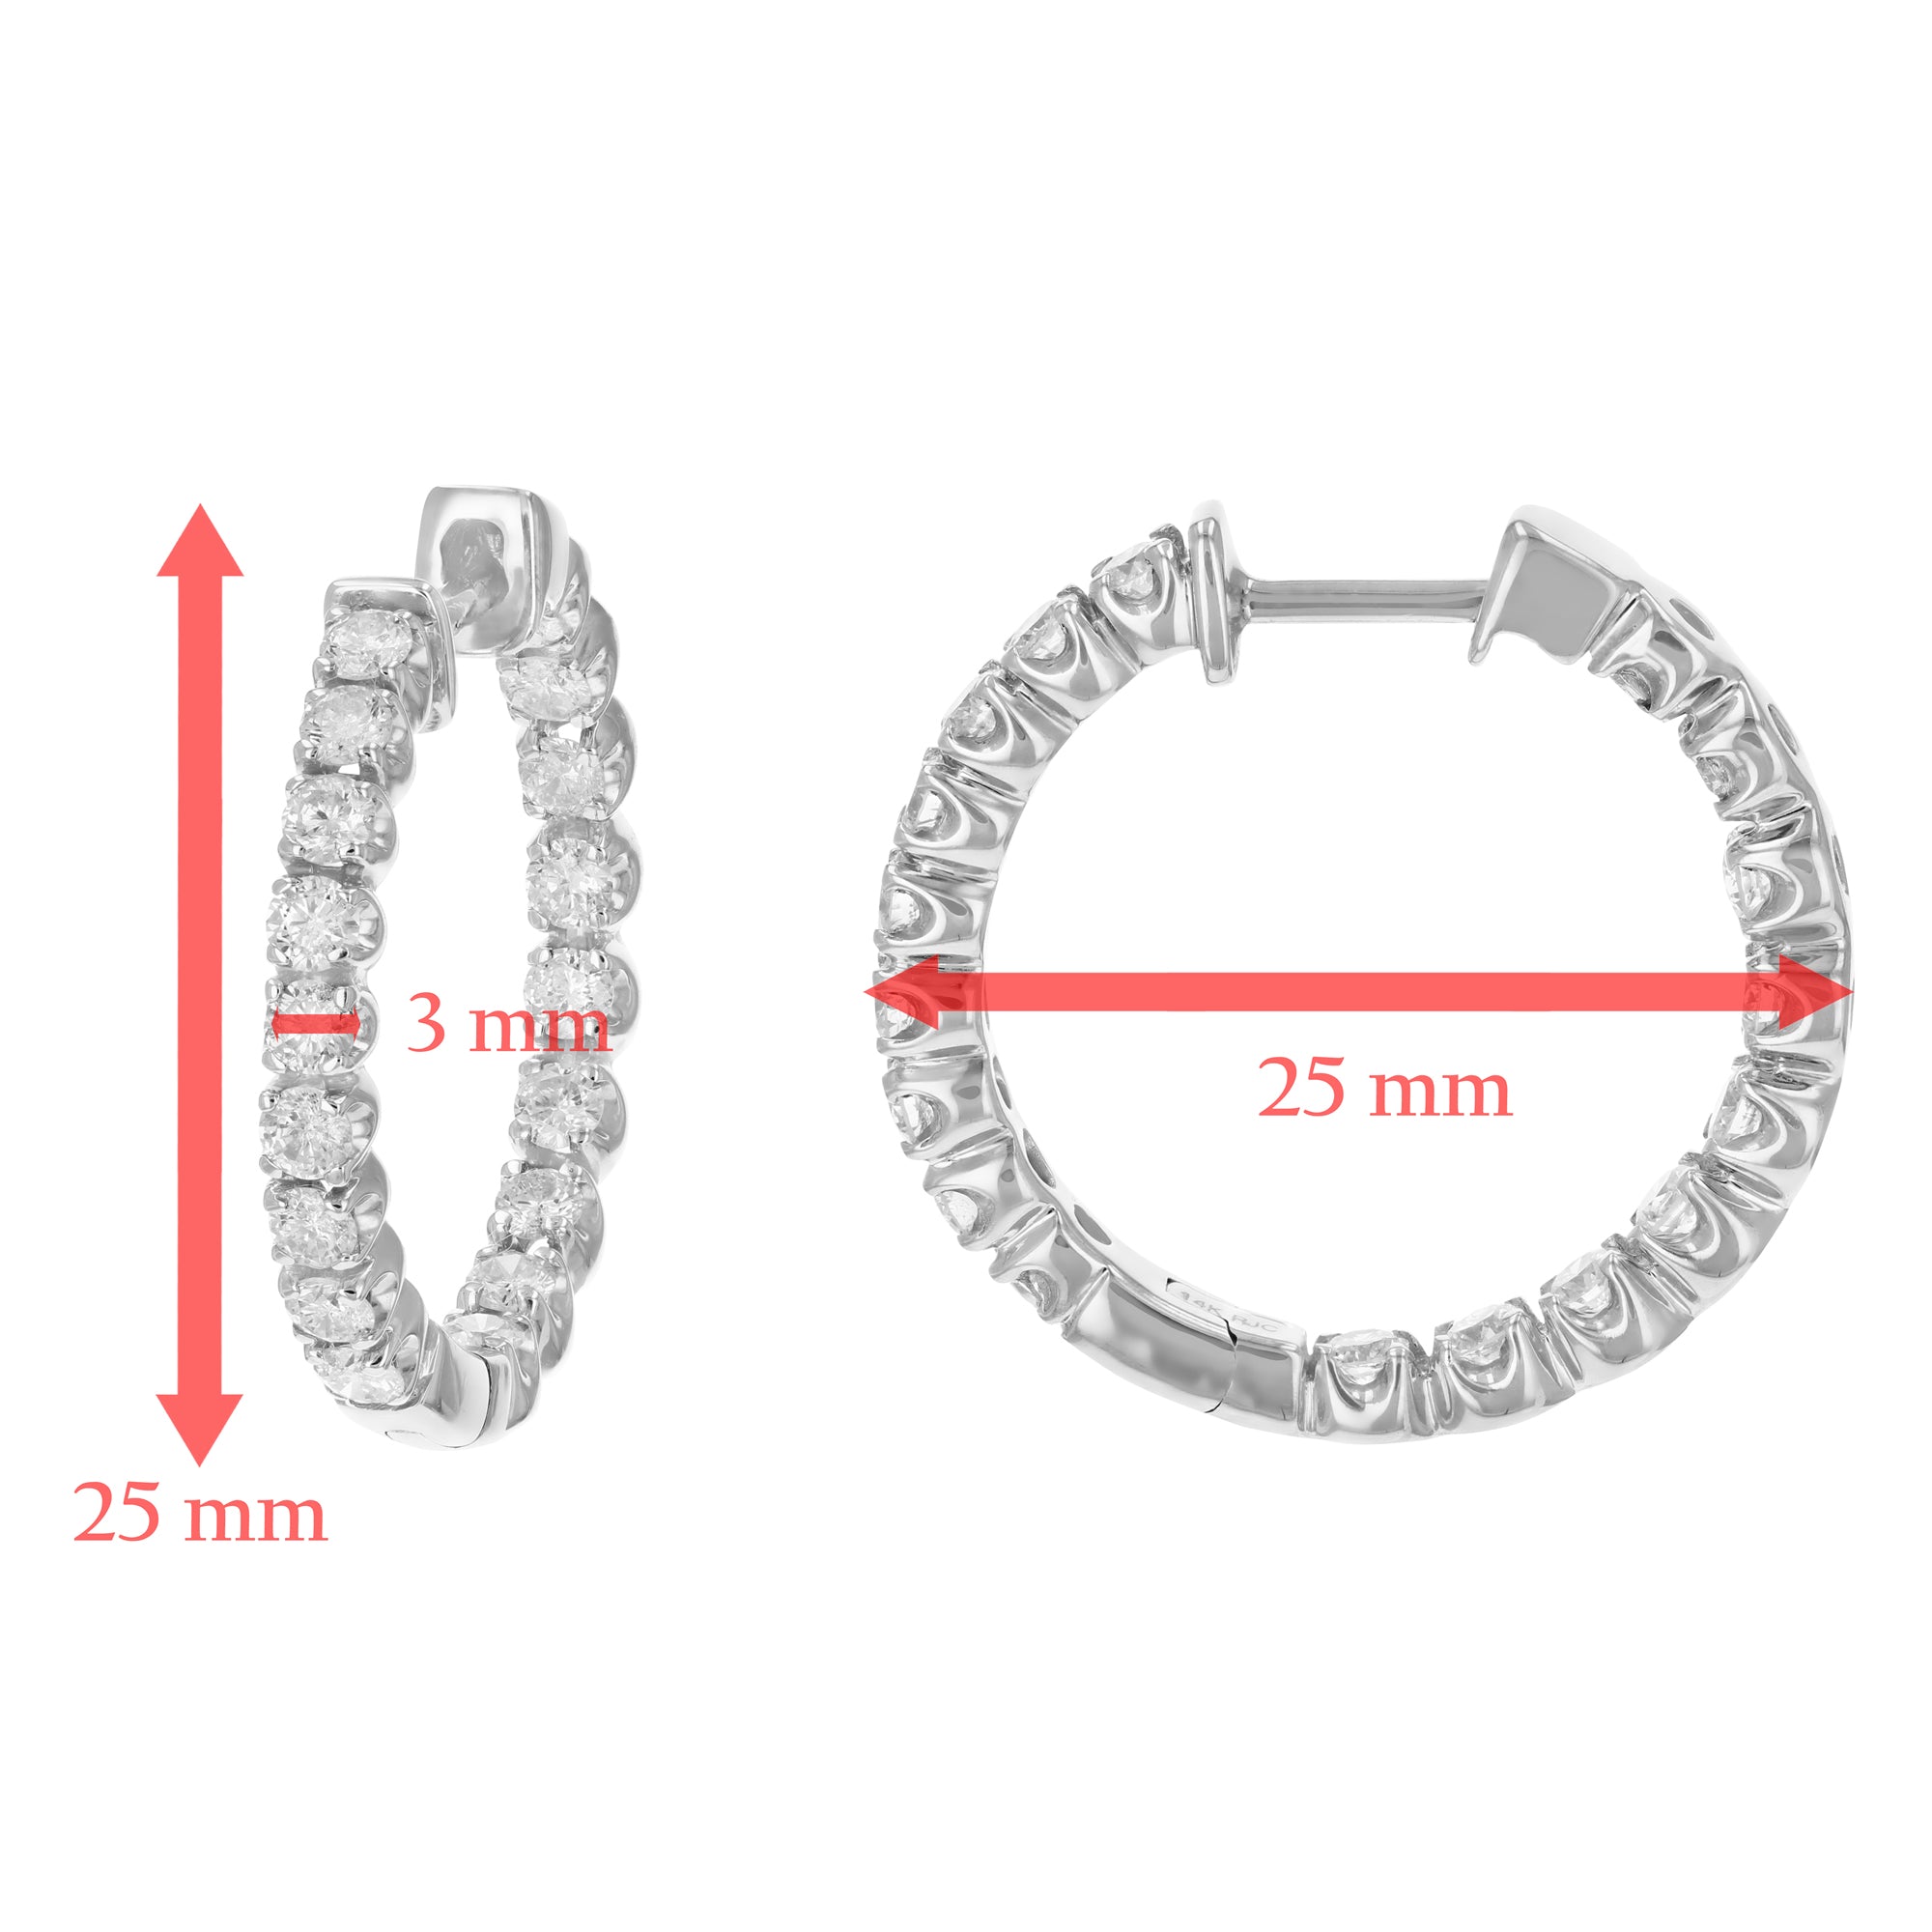 2 cttw Diamond Inside Out Hoop Earrings 14K White Gold Round Prong Set 1 inch